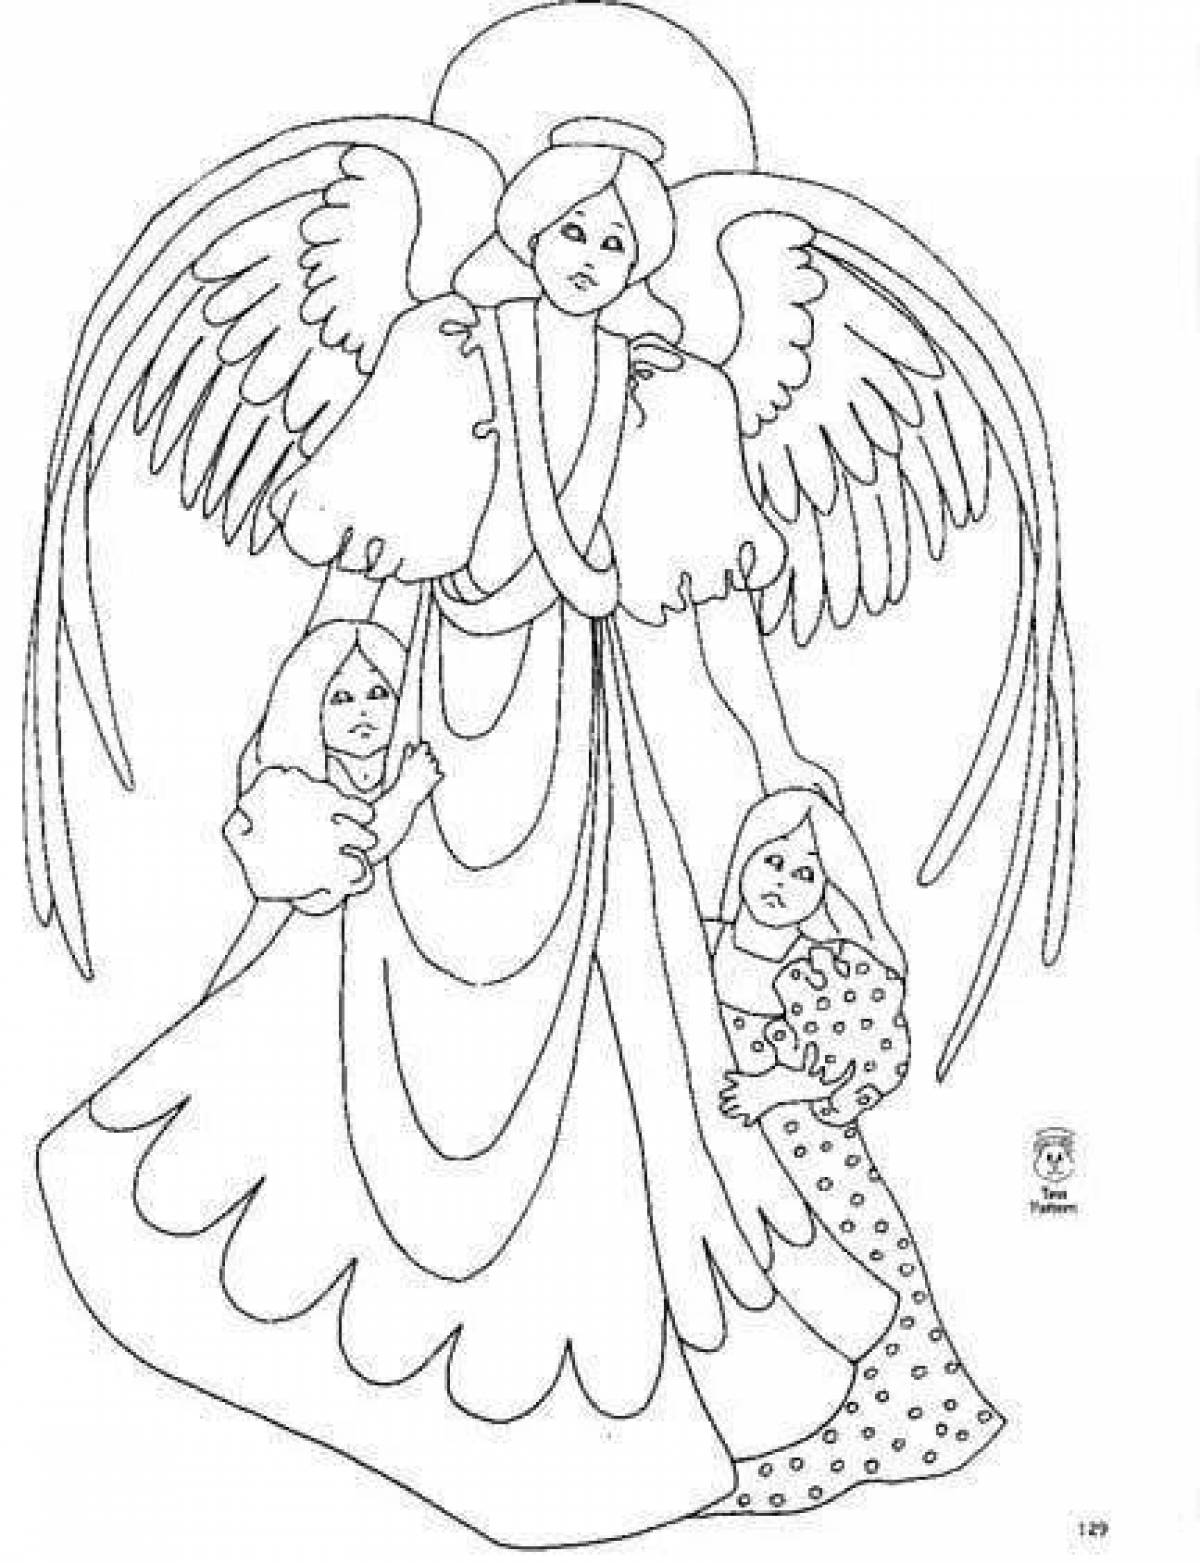 Exquisite guardian angel coloring